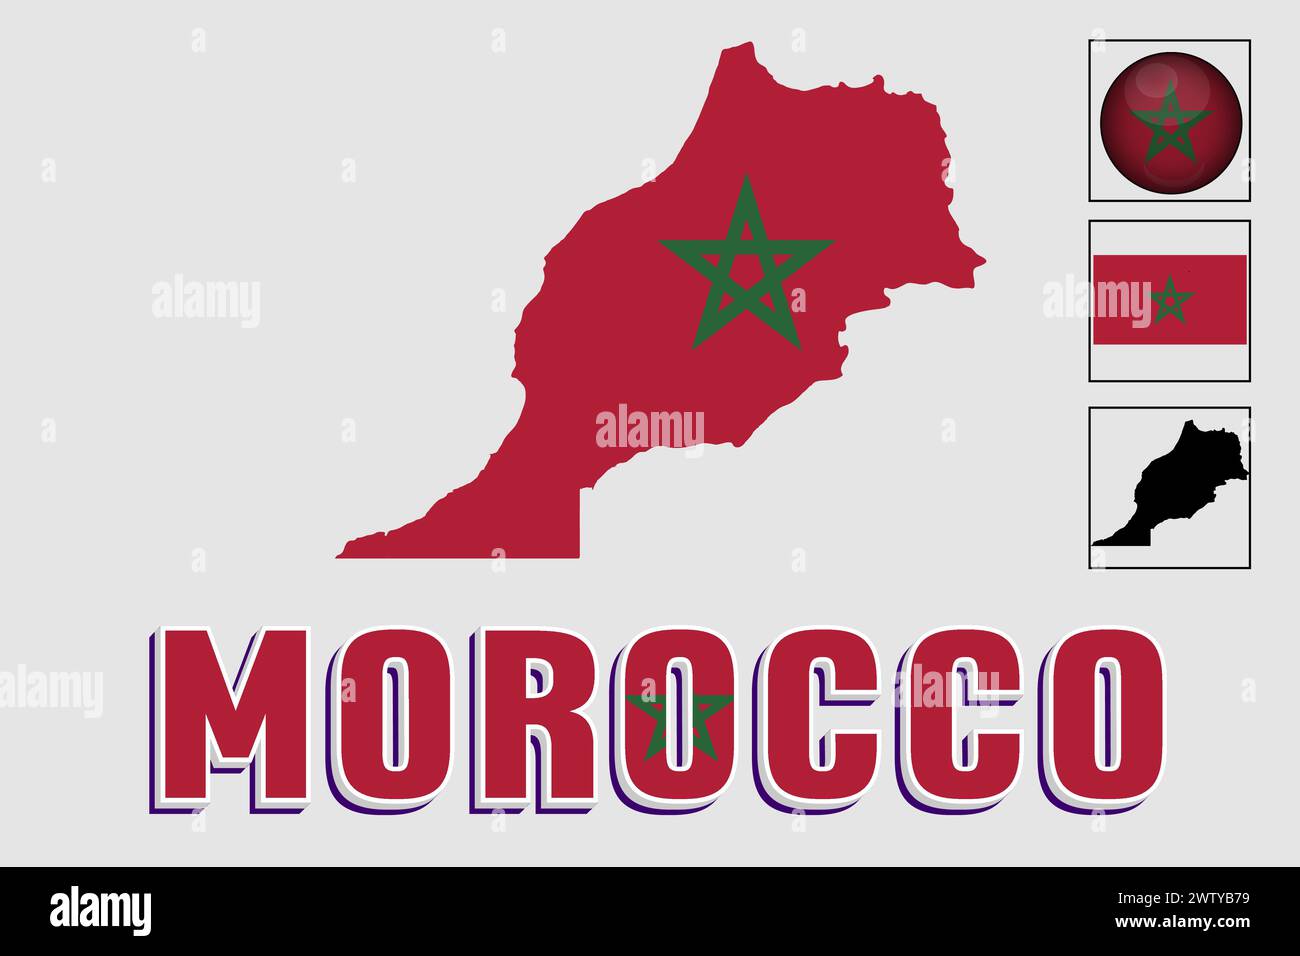 Morocco flag and map in a vector graphic Stock Vector